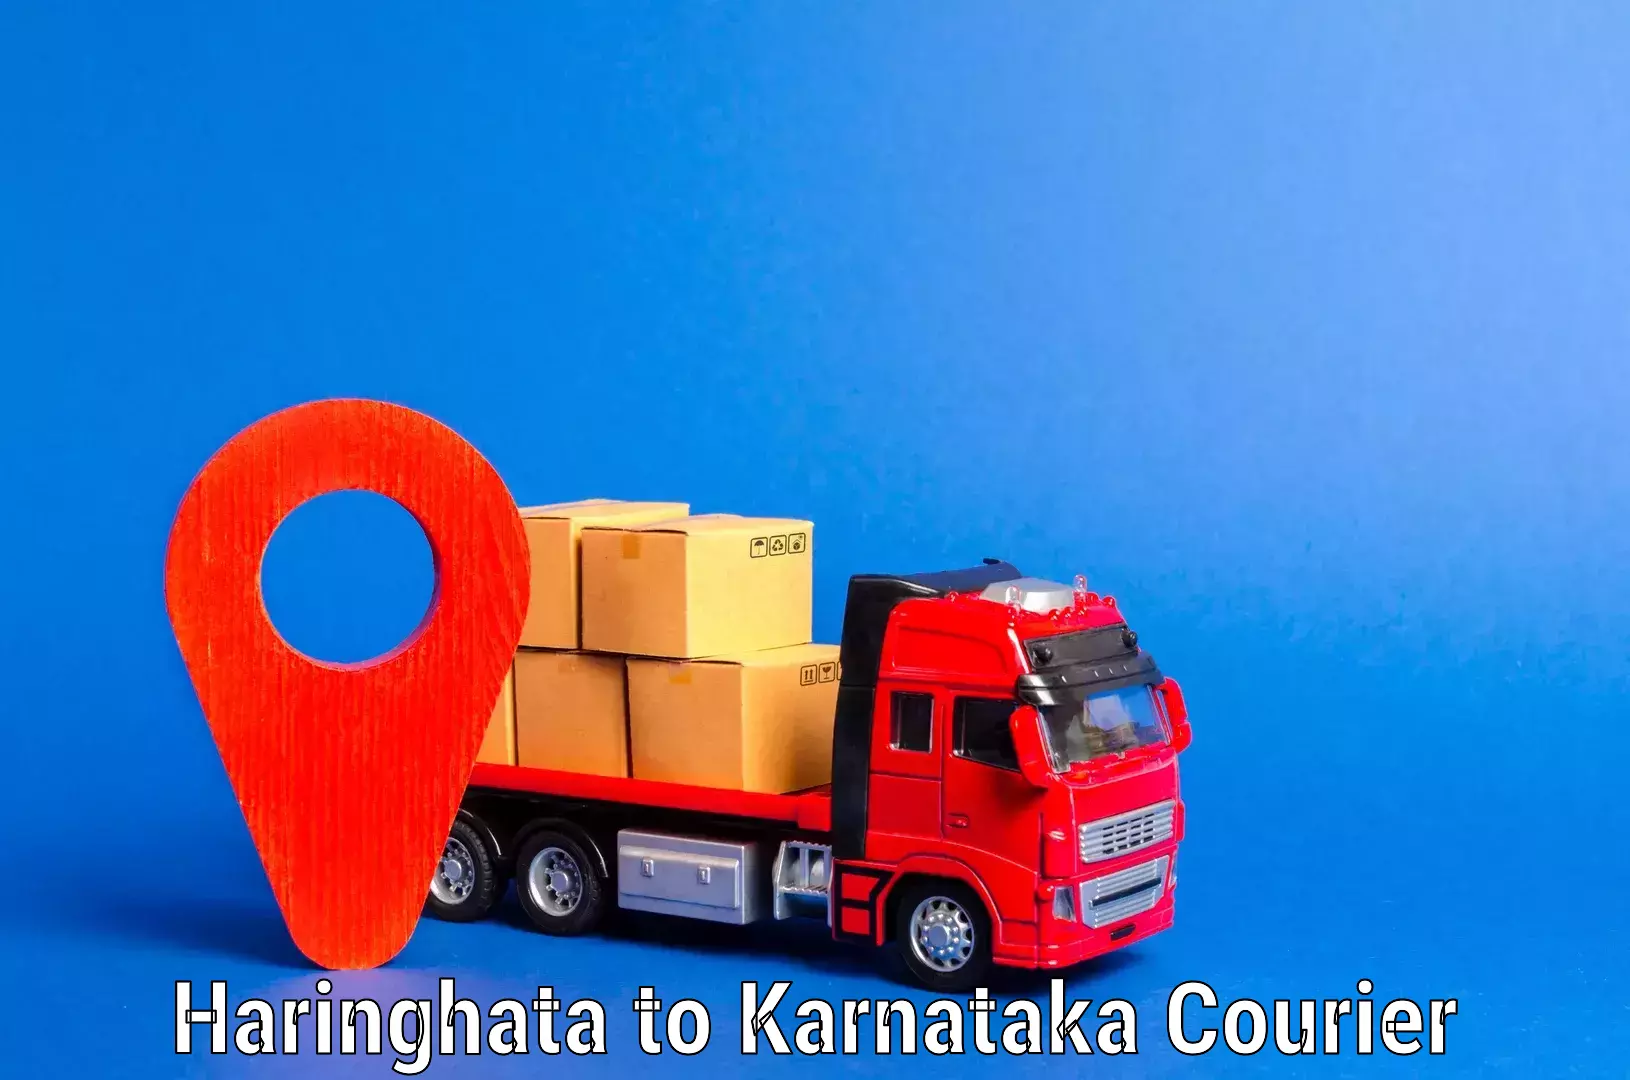 Budget-friendly moving services in Haringhata to Karnataka